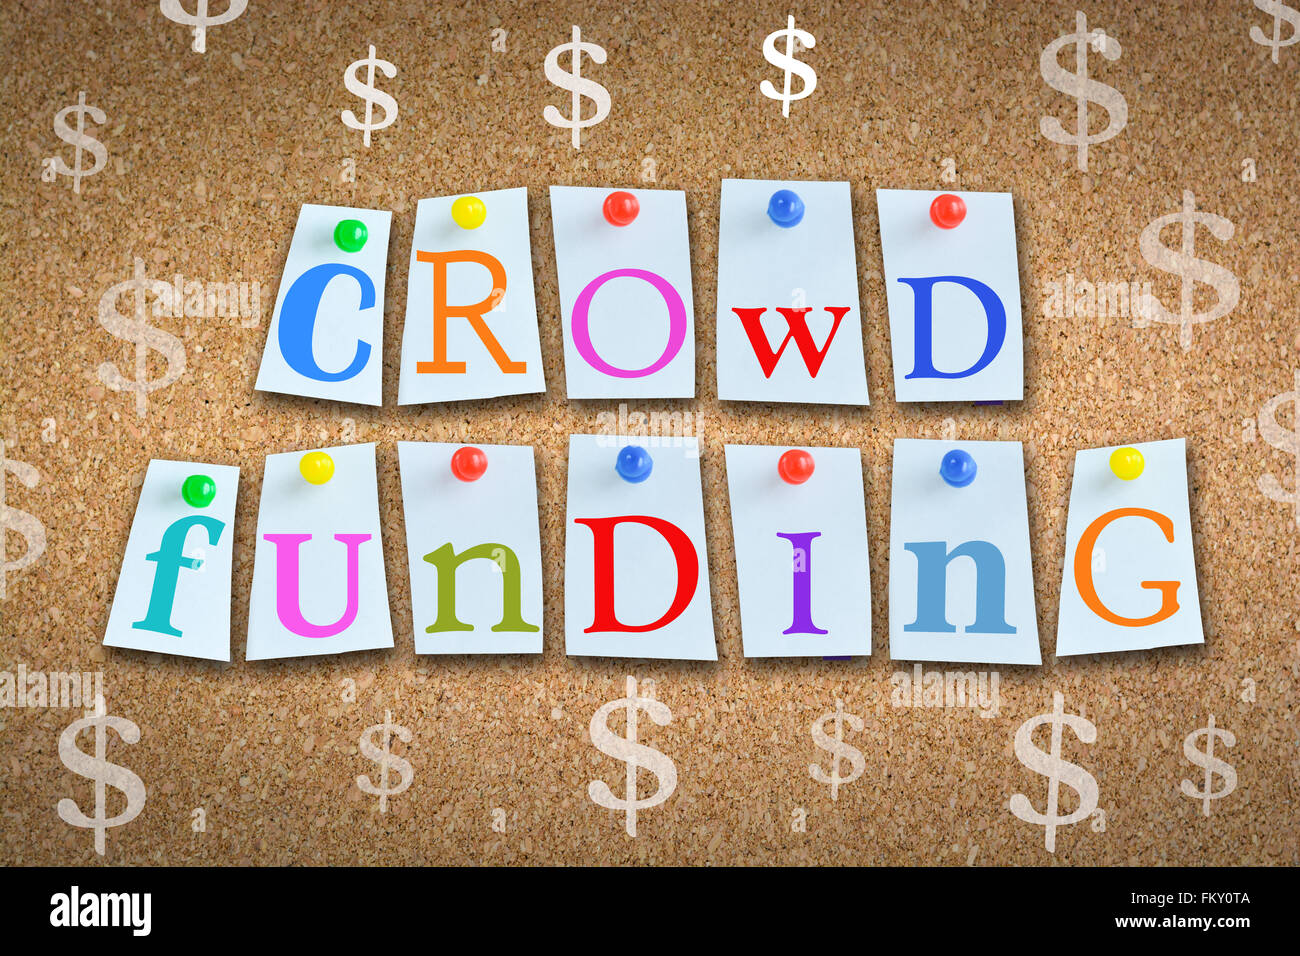 Crowdfunding concept with adhesive notes and pins on cork billboard Stock Photo